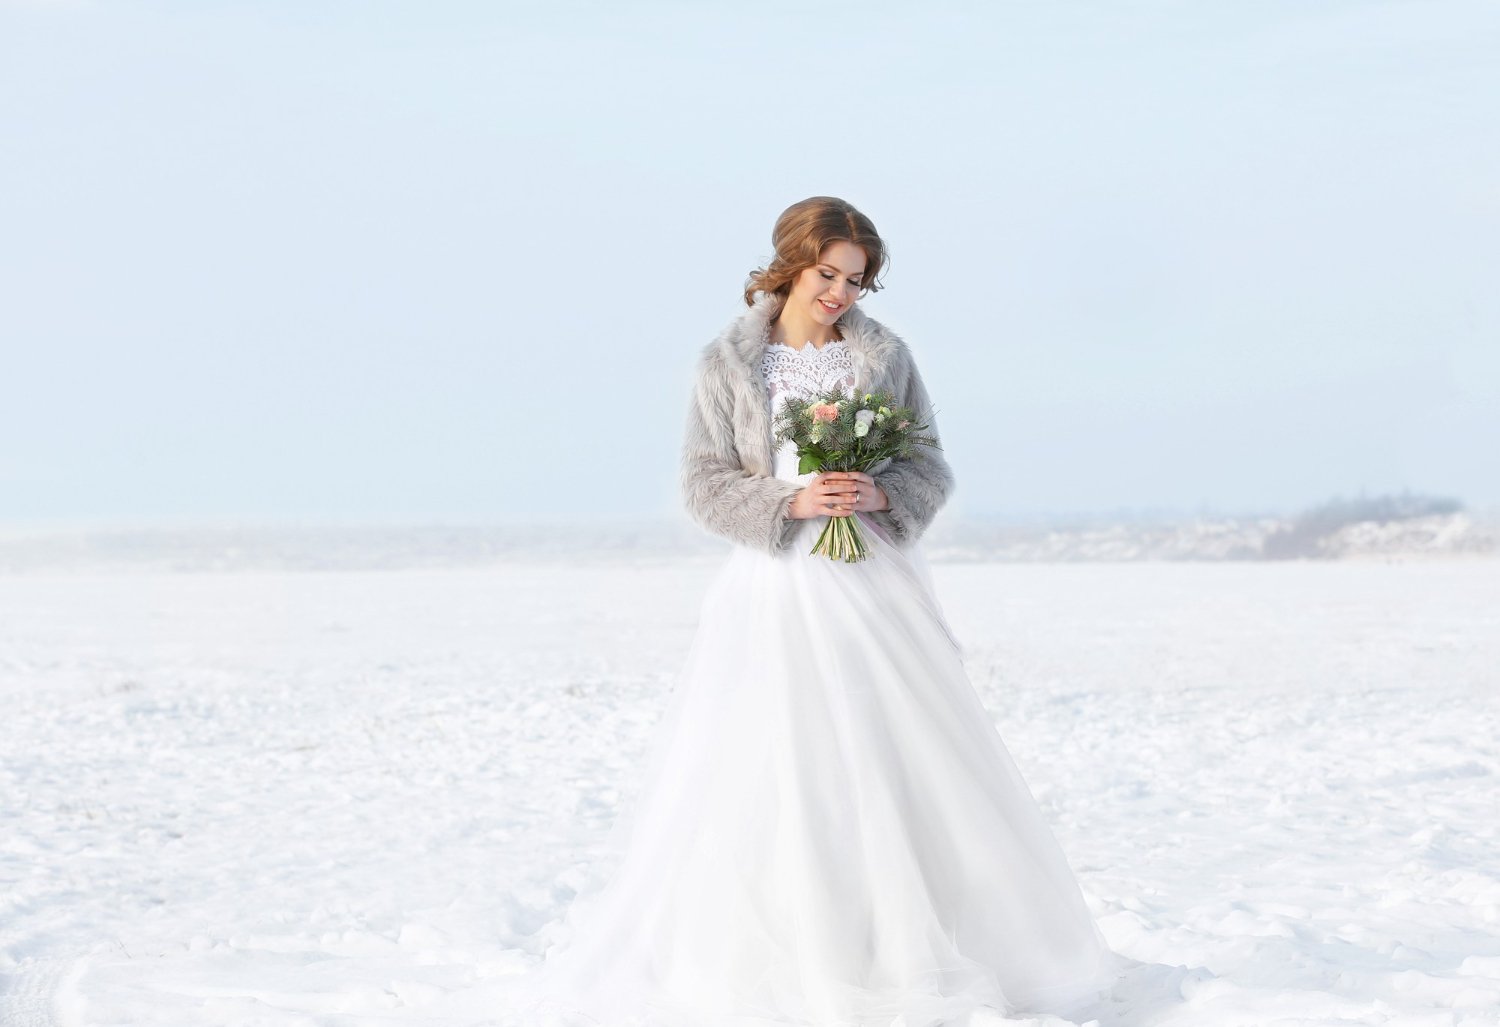 eautiful bride with bouquet outdoors on winter day